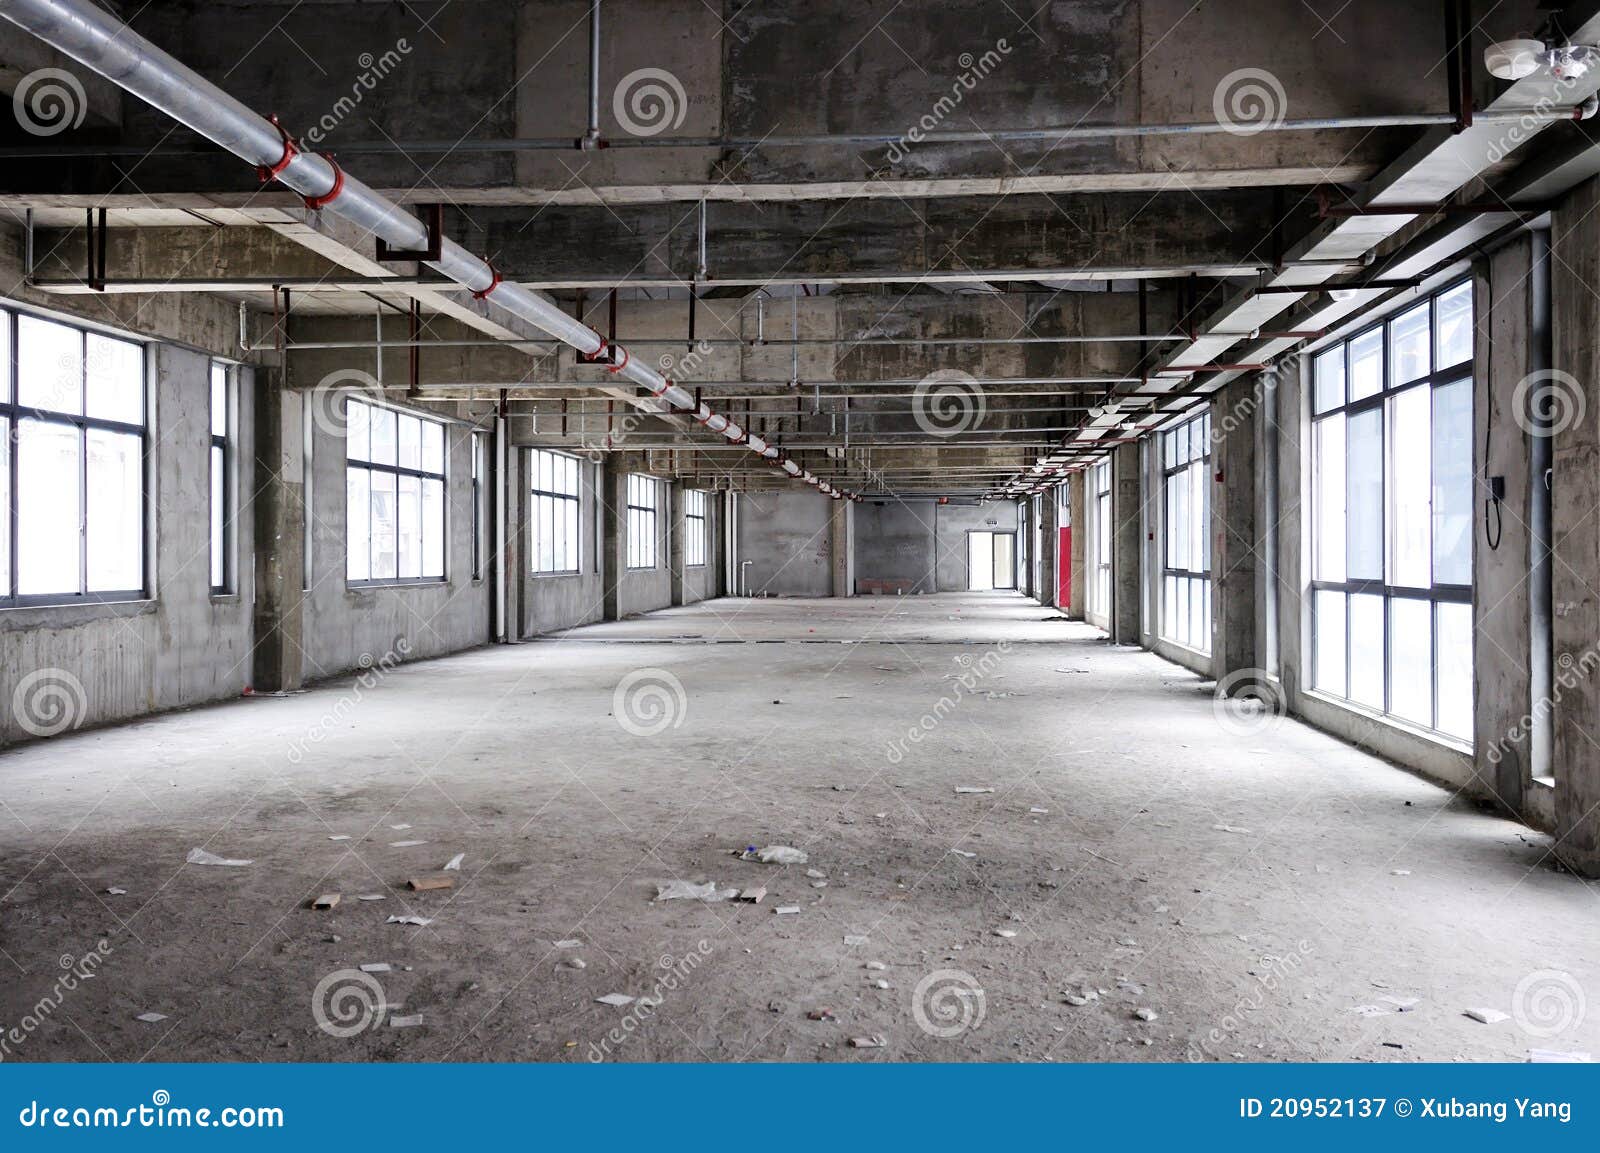 unfinished building interior